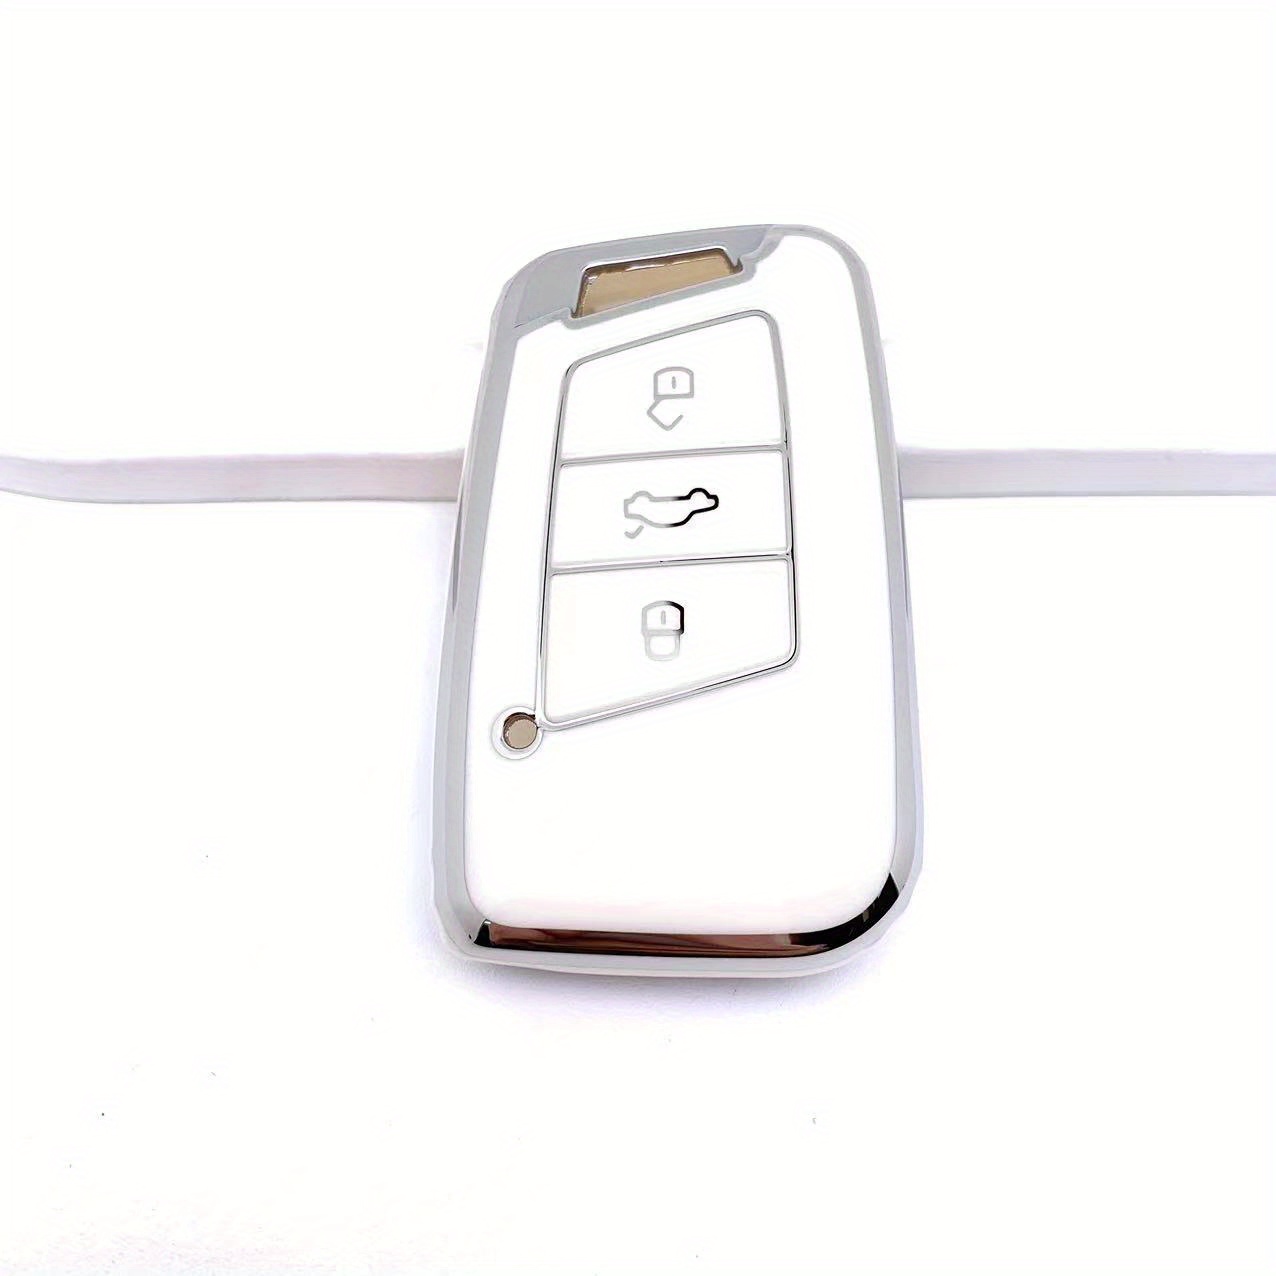  1797 for VW Volkswagen Key Fob Cover Accessories Bling Keychain  Jetta Tiguan Arteon Atlas Taos Car Remote Case Shell Protector Girly Cute 4  Button White Gold TPU : Automotive